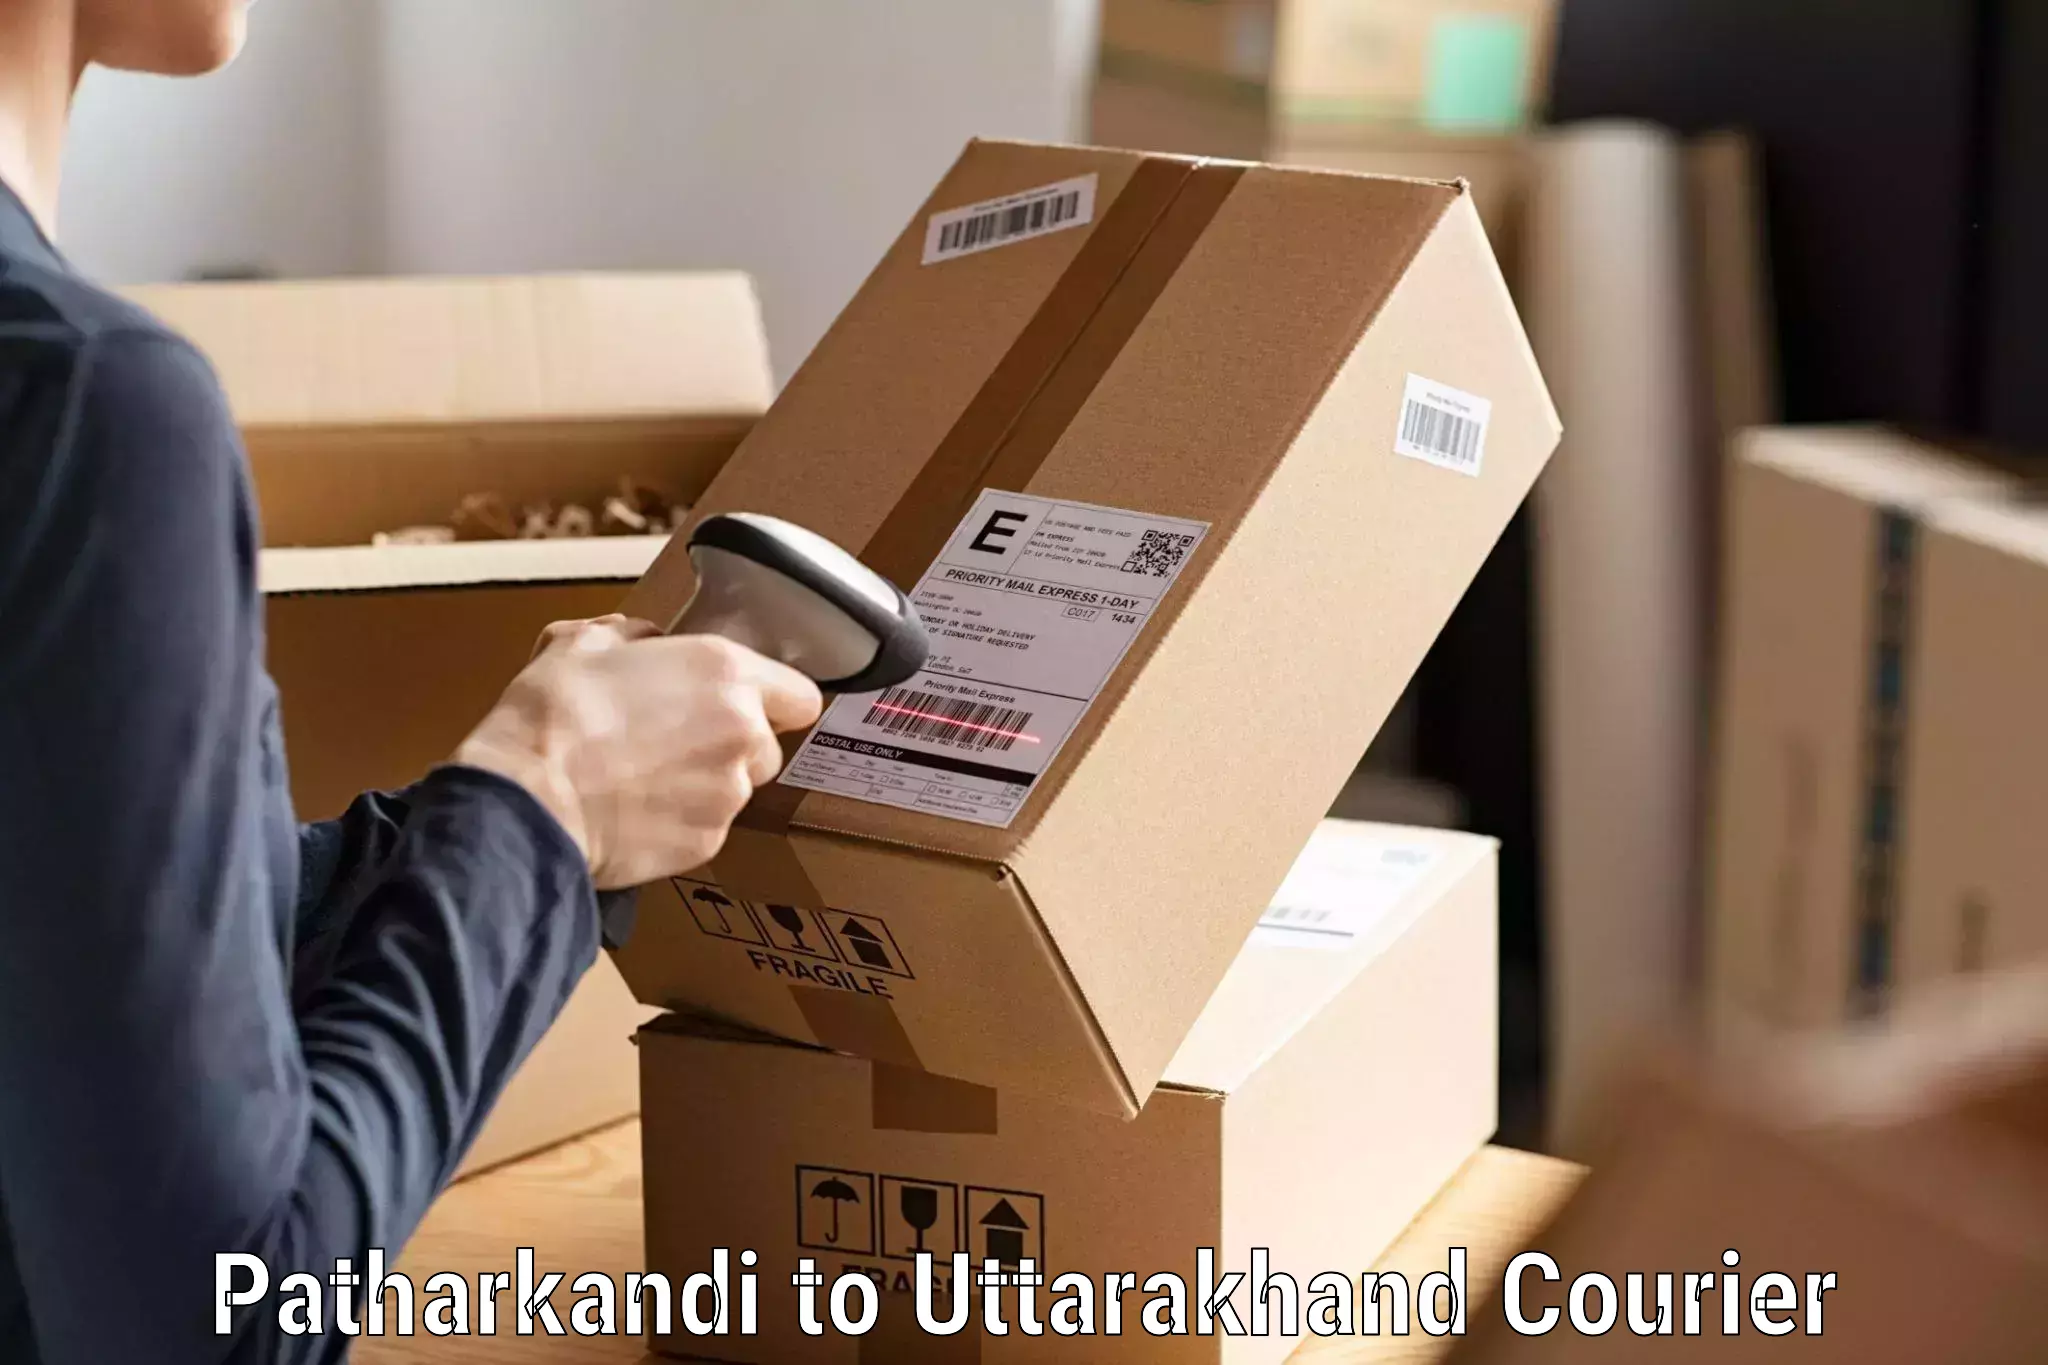 Parcel handling and care Patharkandi to Rudrapur